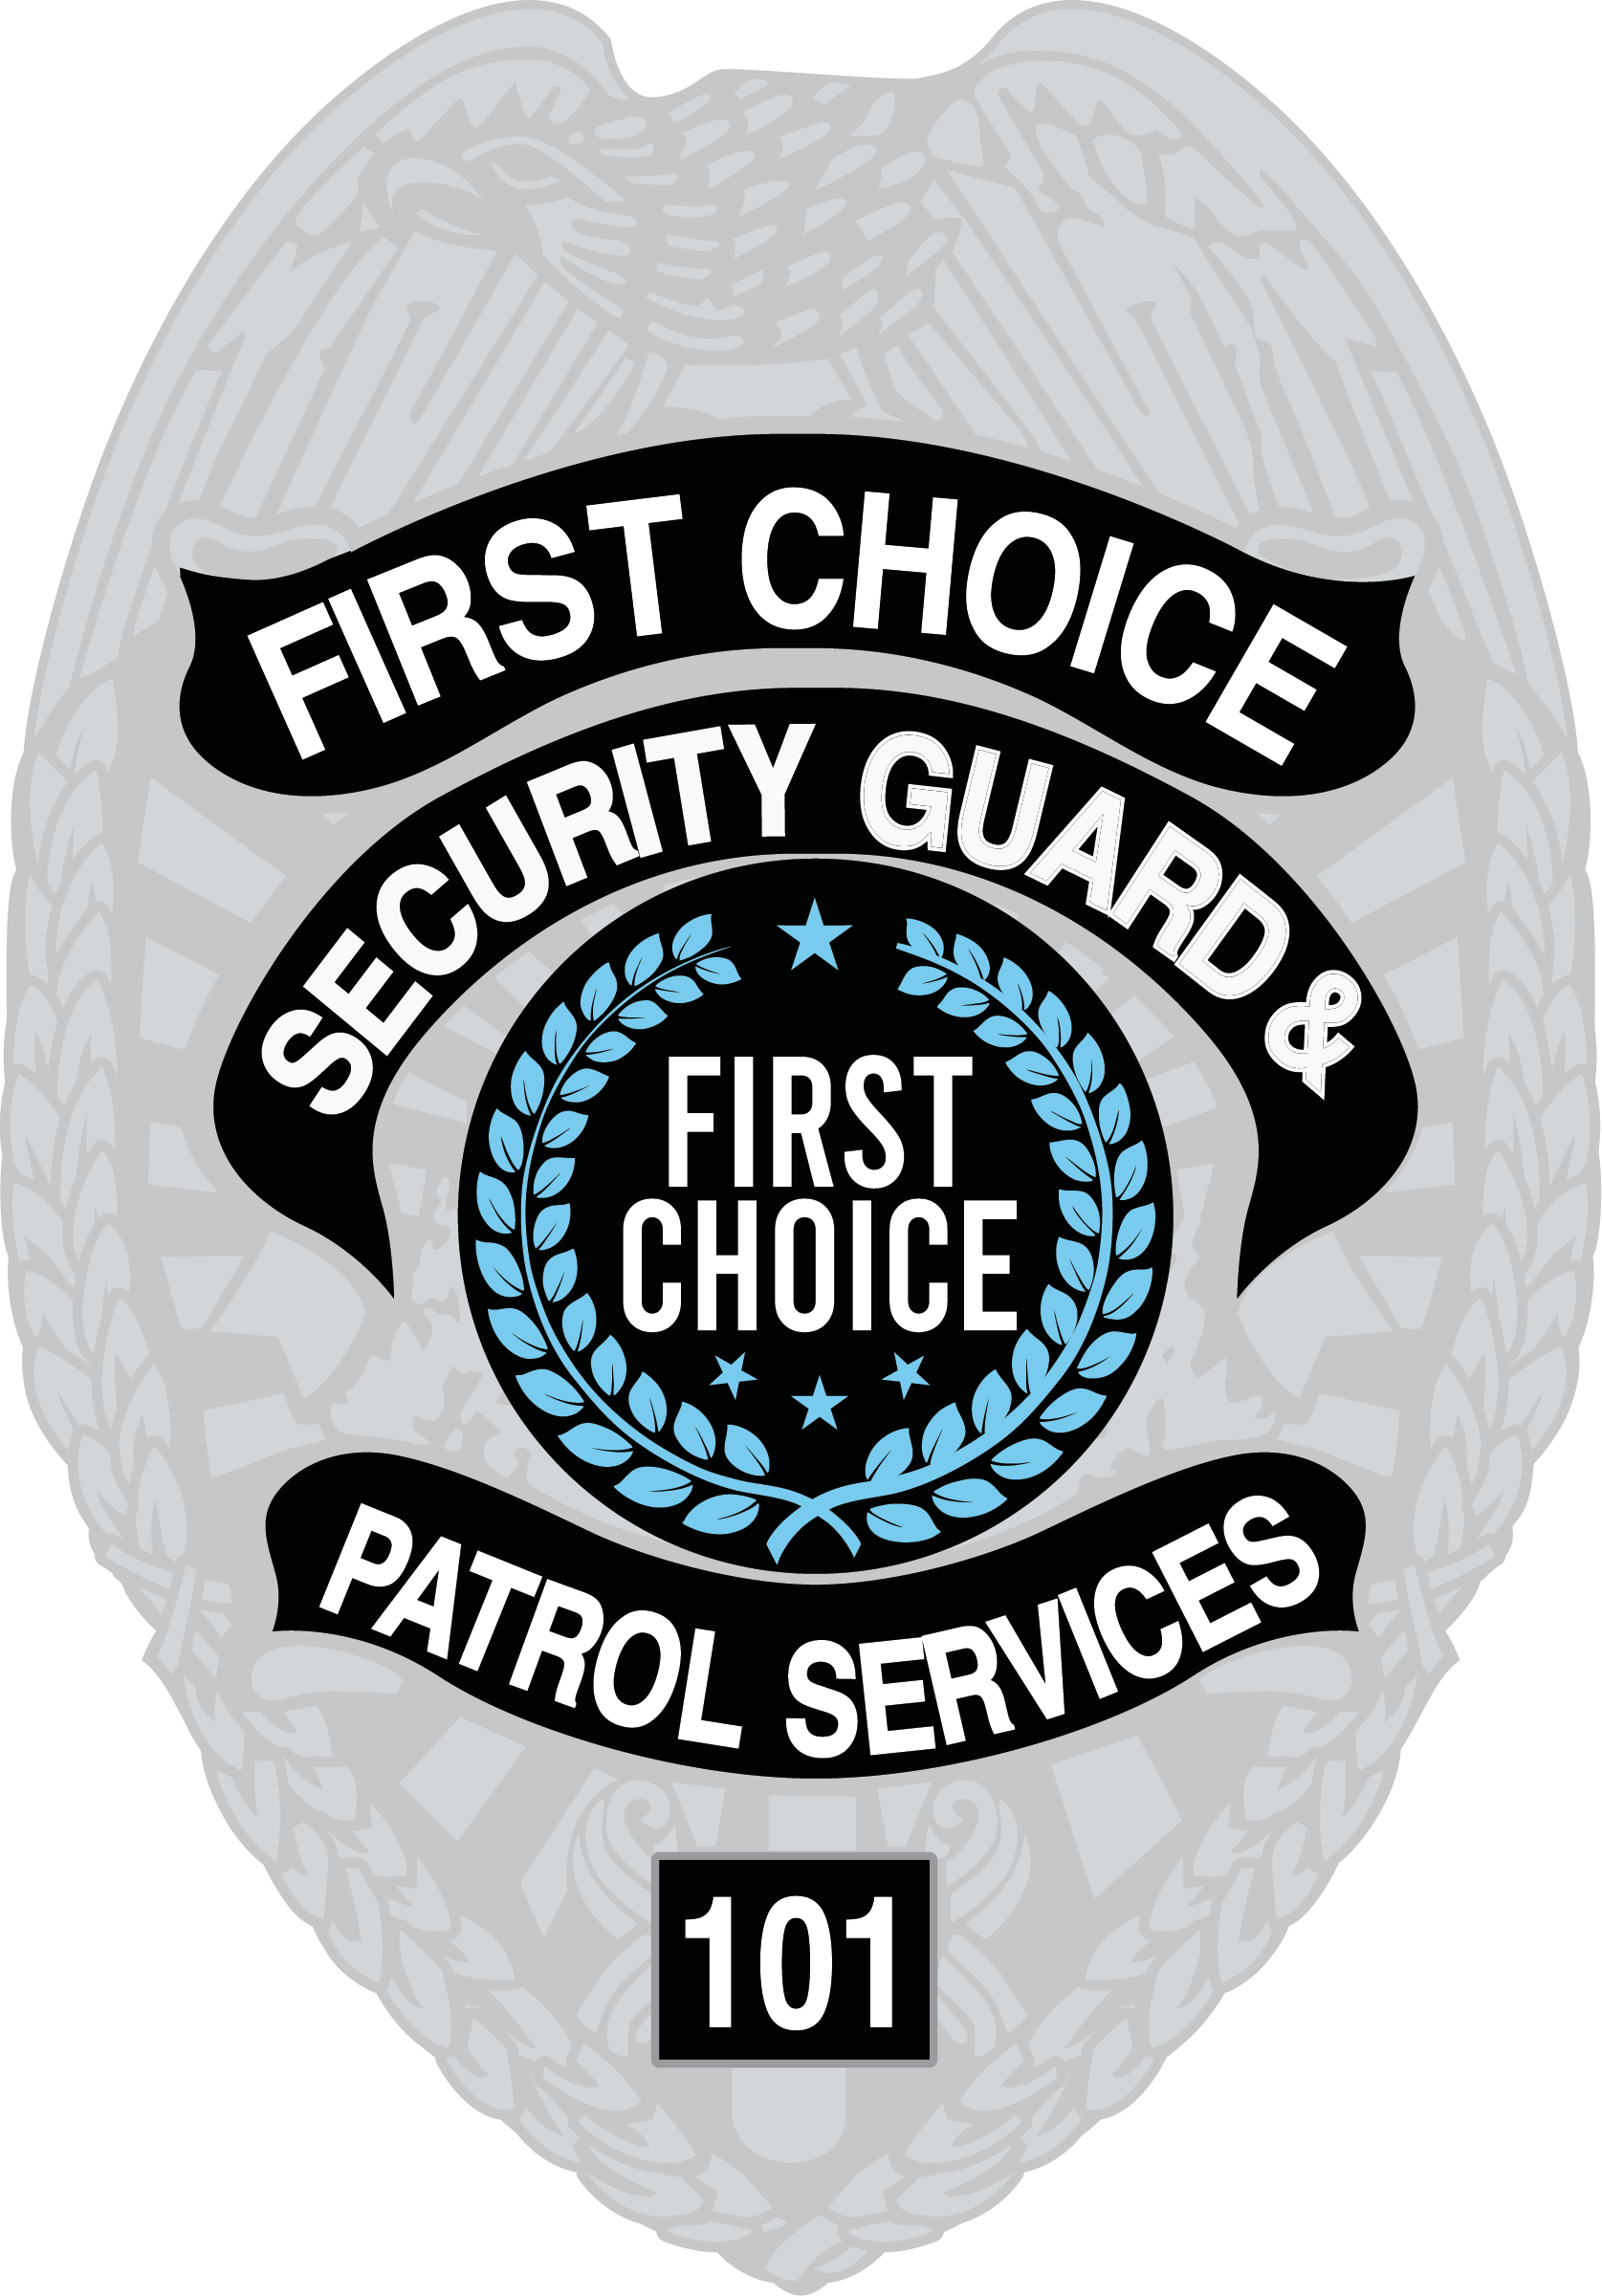 First-Choice-Security-Guard-Patrol-Services-logo.png